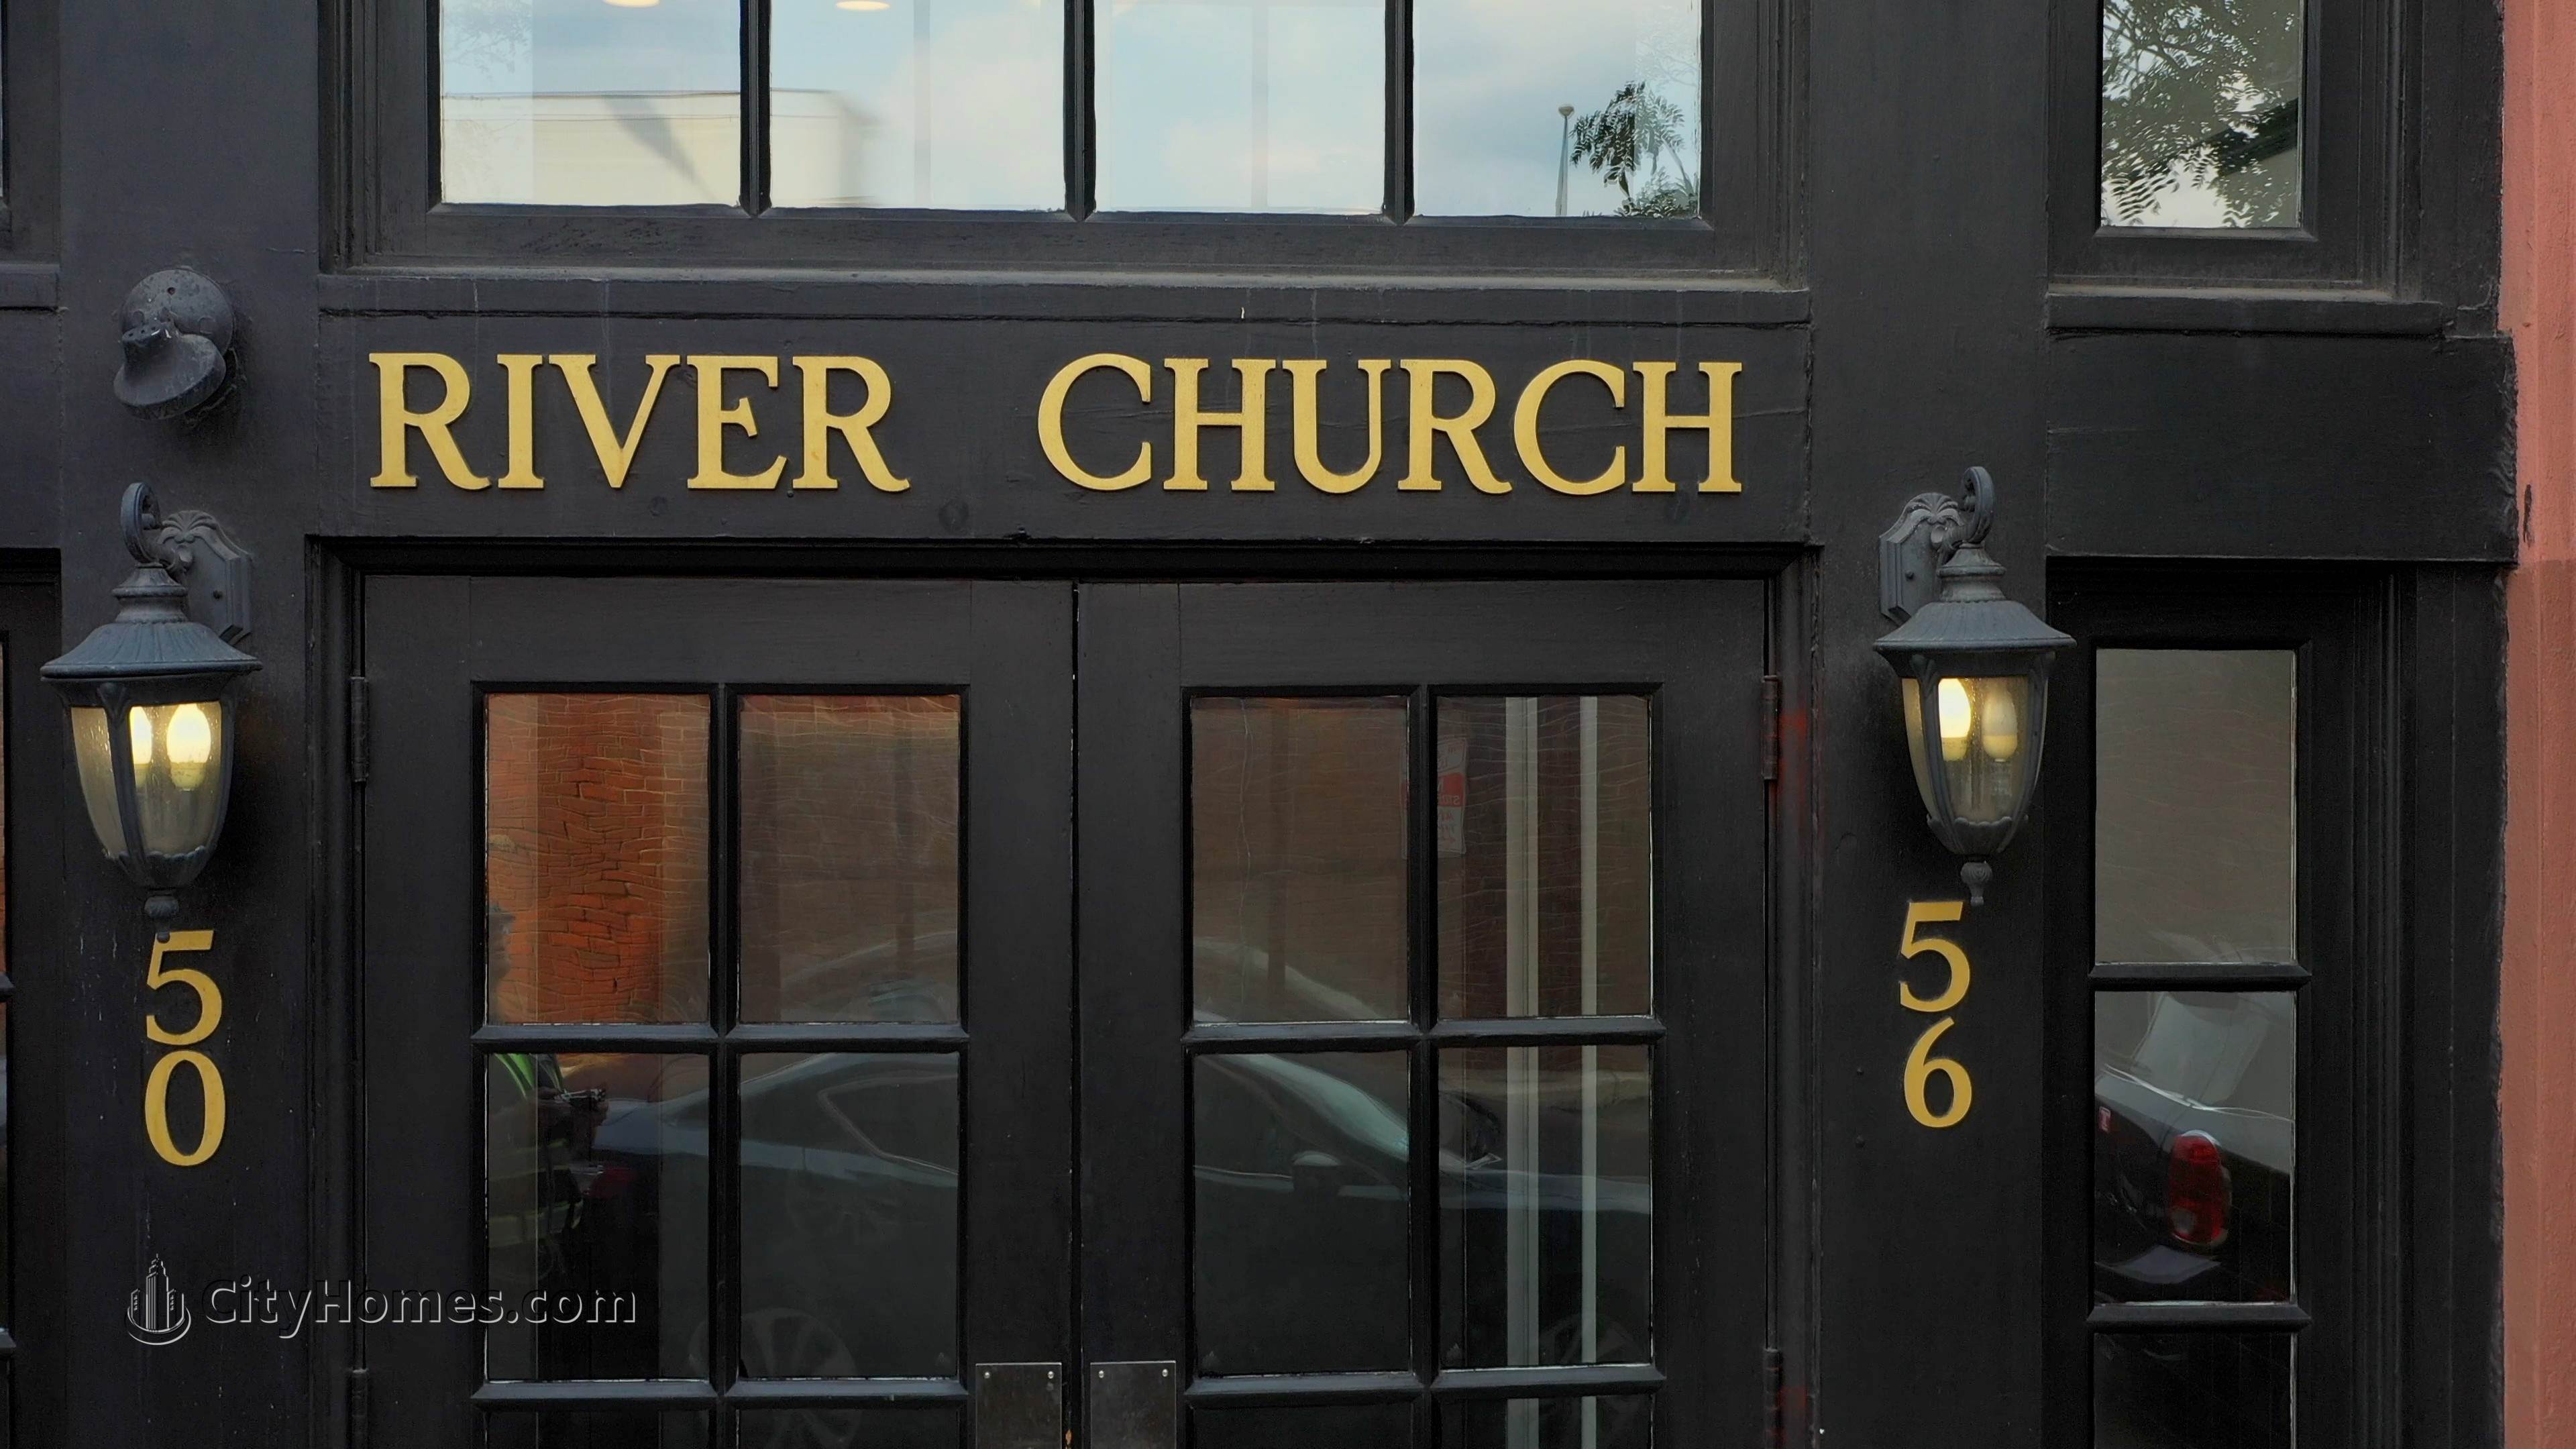 River Church building at 50 N Front St, Old City, Philadelphia, PA 19106